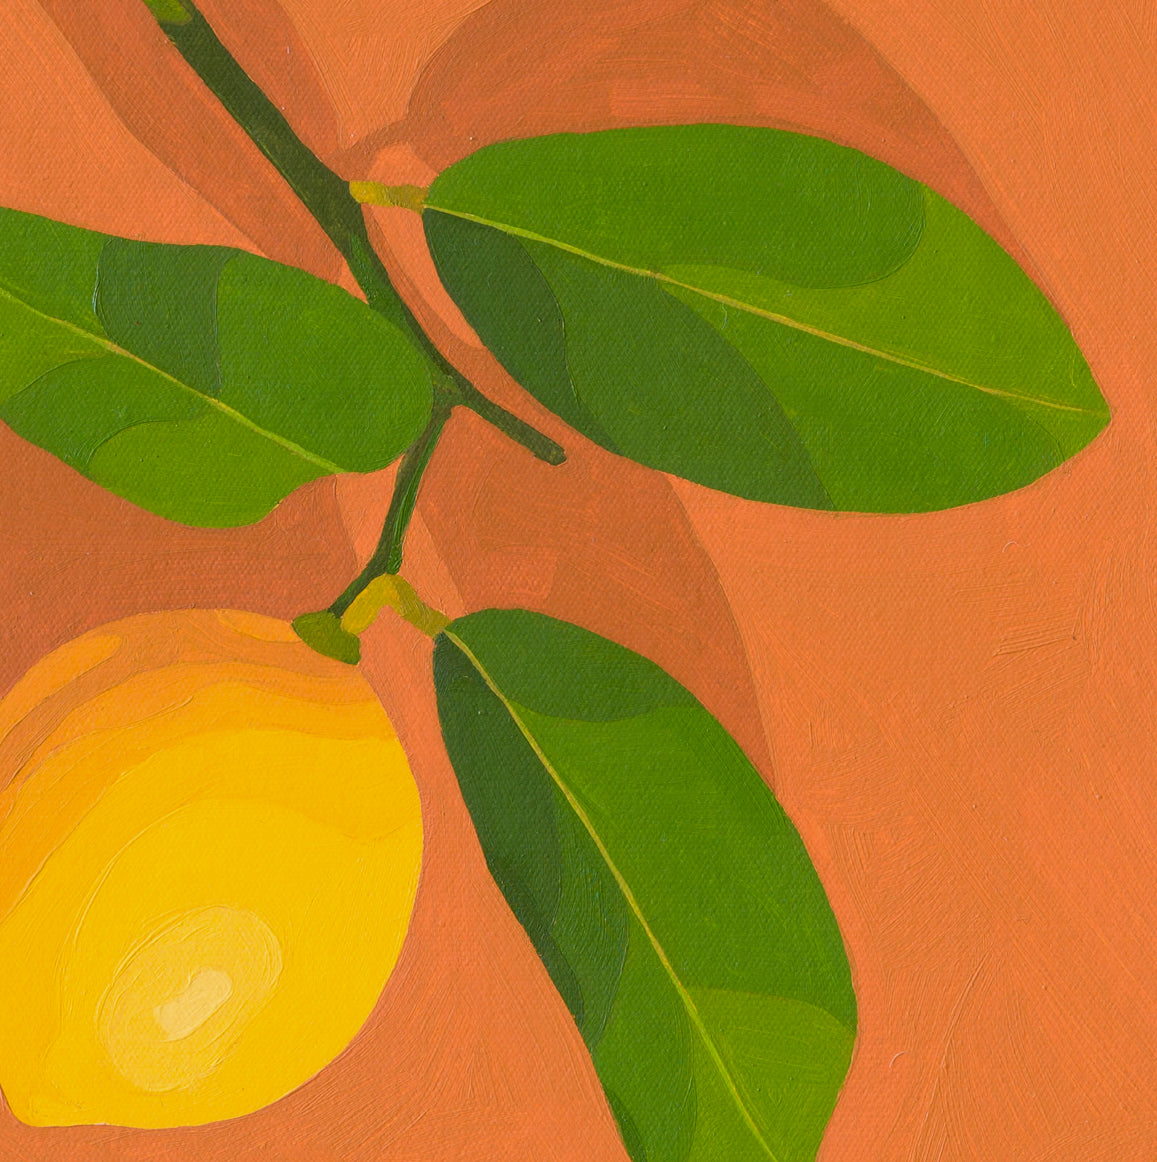 original oil painting of a lemon with stem and leaves sitting on a background of colour tan with darker tan shadow